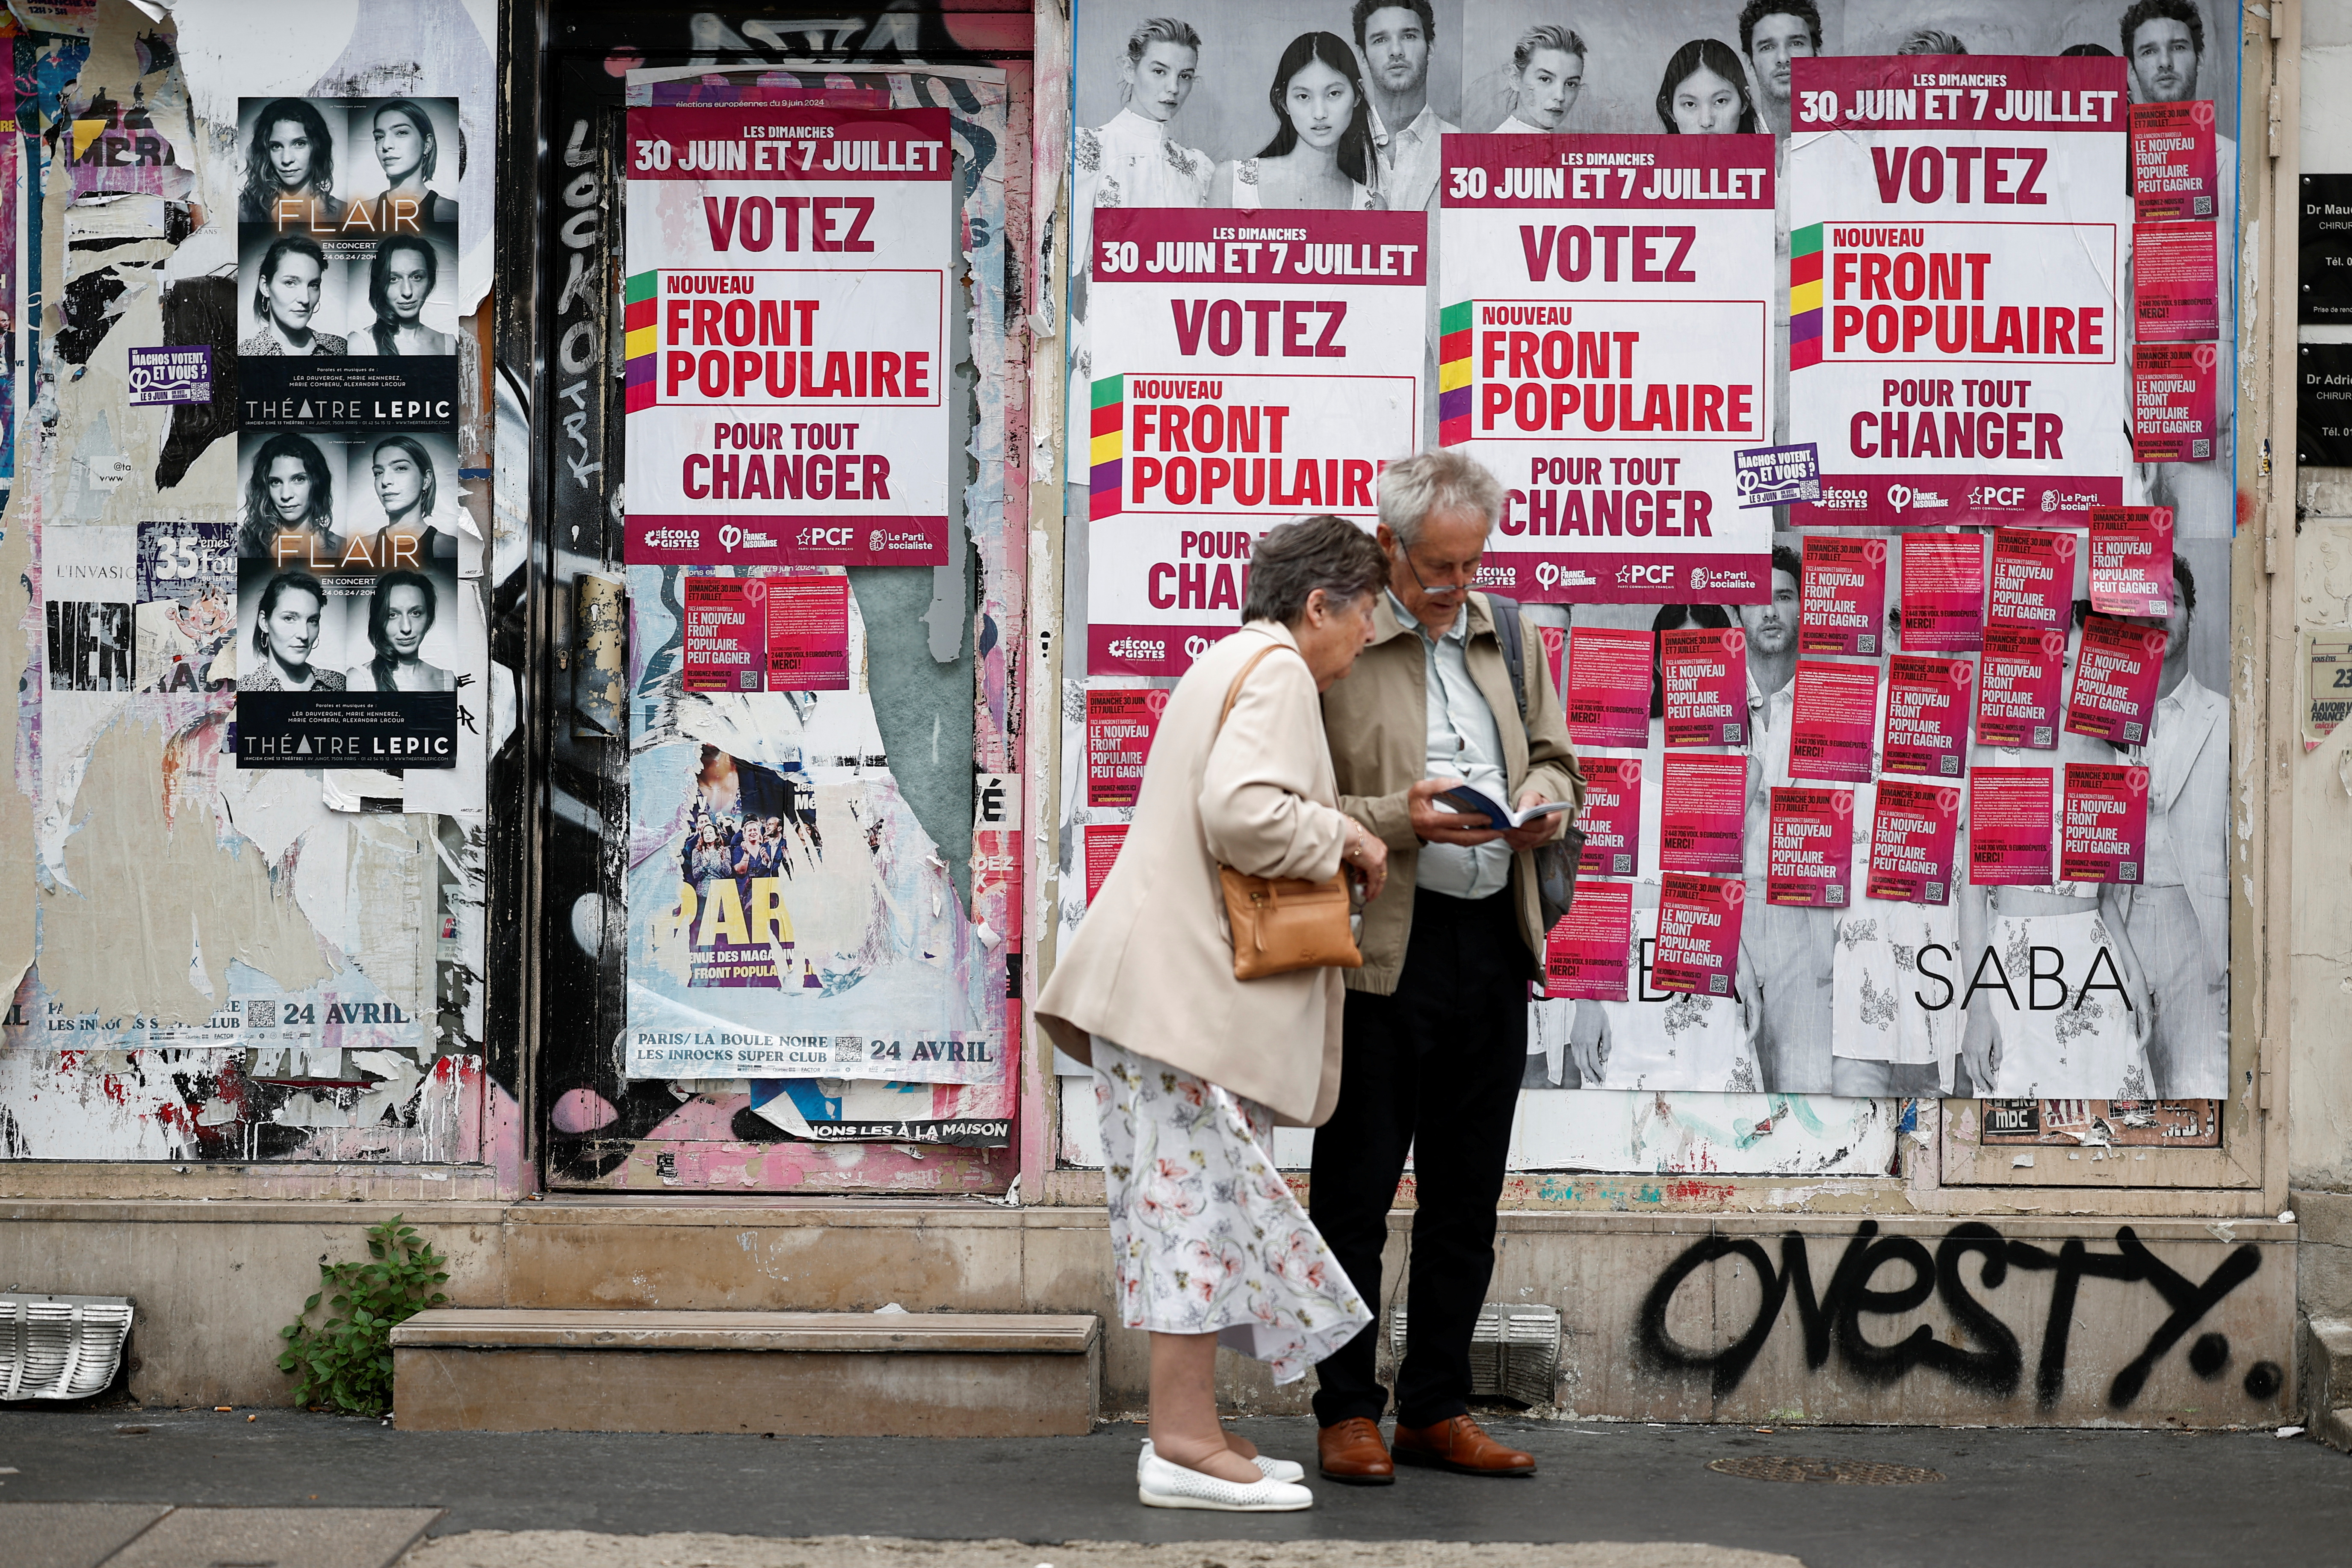 Election boards are seen ahead of the French parliamentary elections